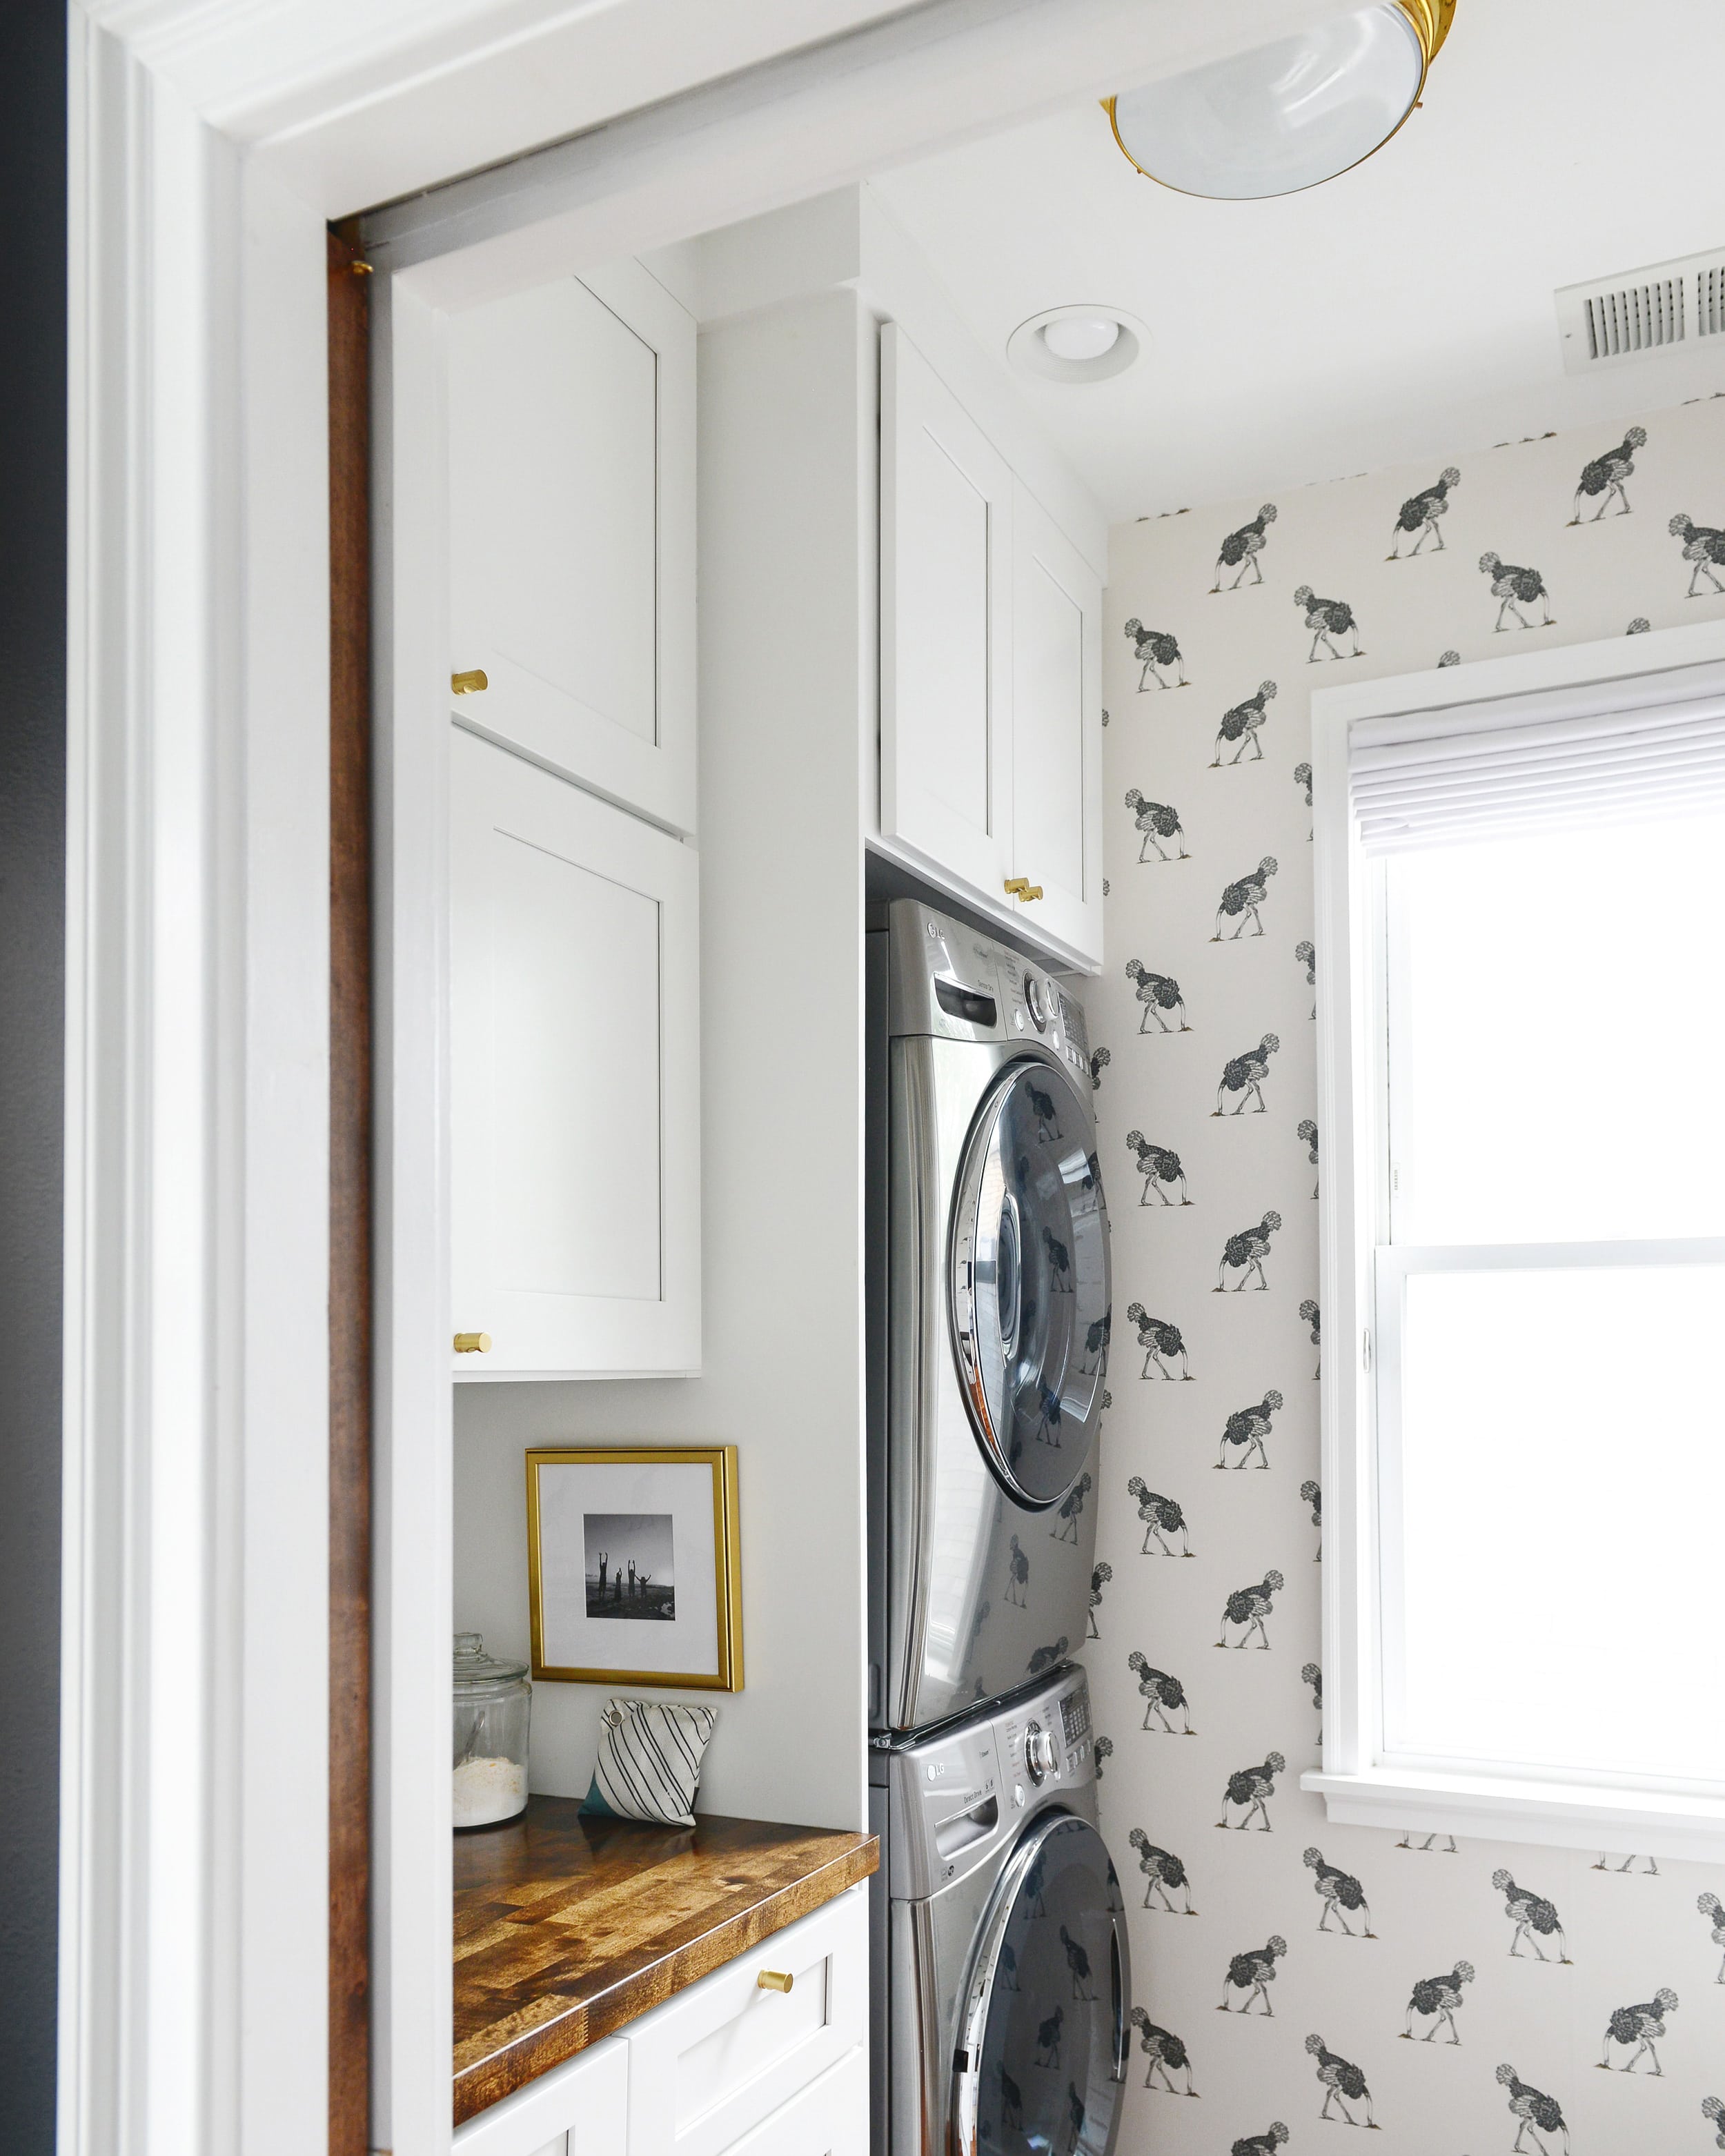 Our ostrich themed wallpaper on full display in our Chicago laundry room. 